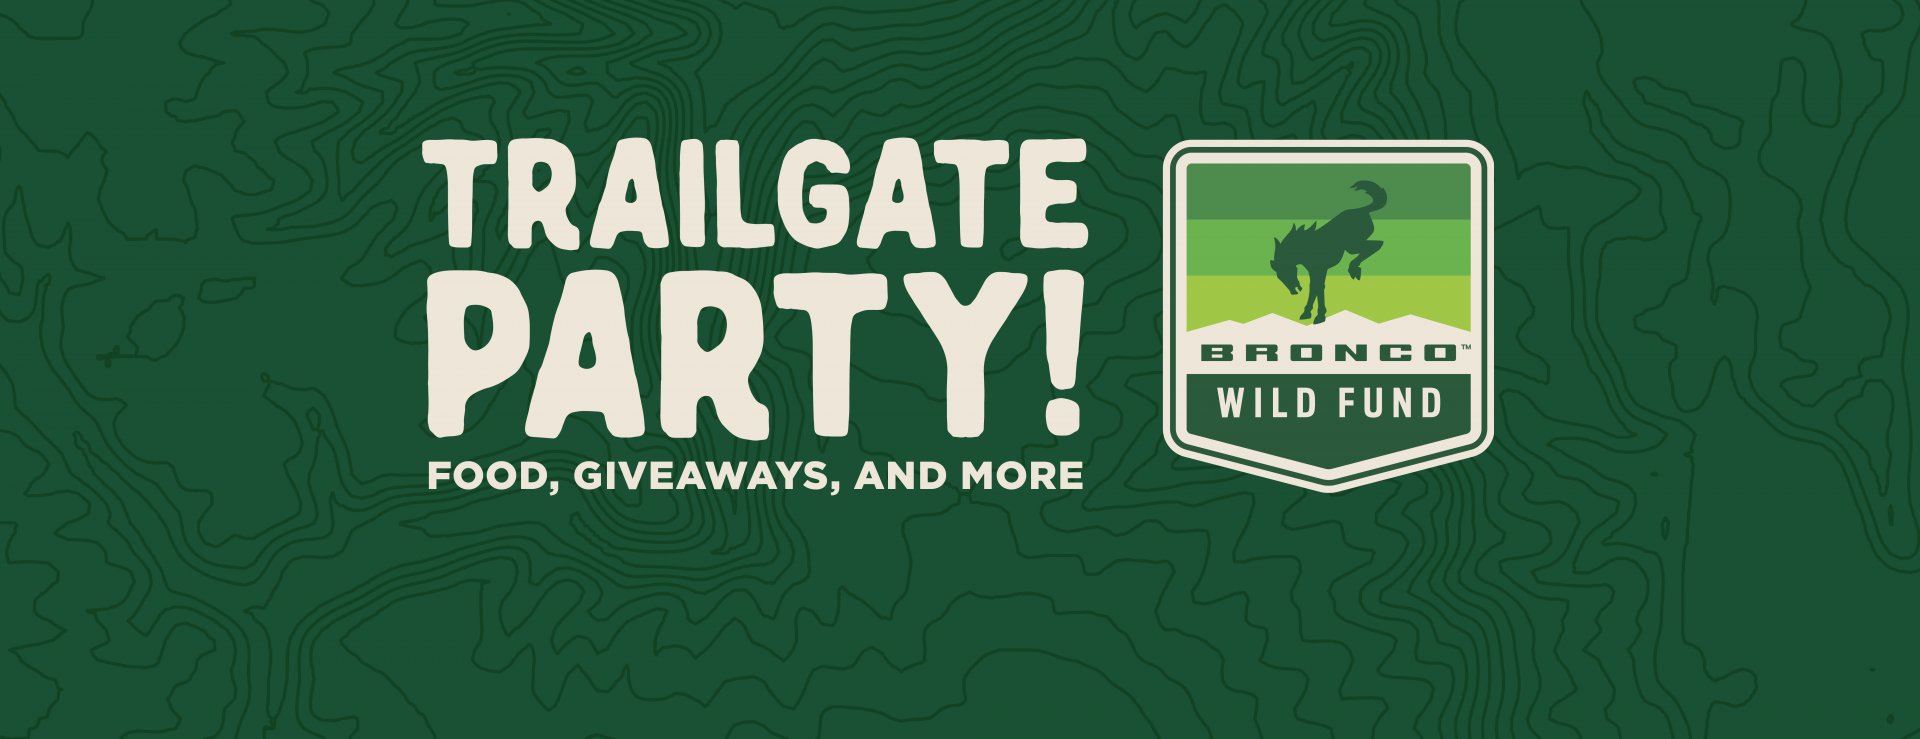 National Trails Day - Trailgate Party! Food, giveaways, and more!